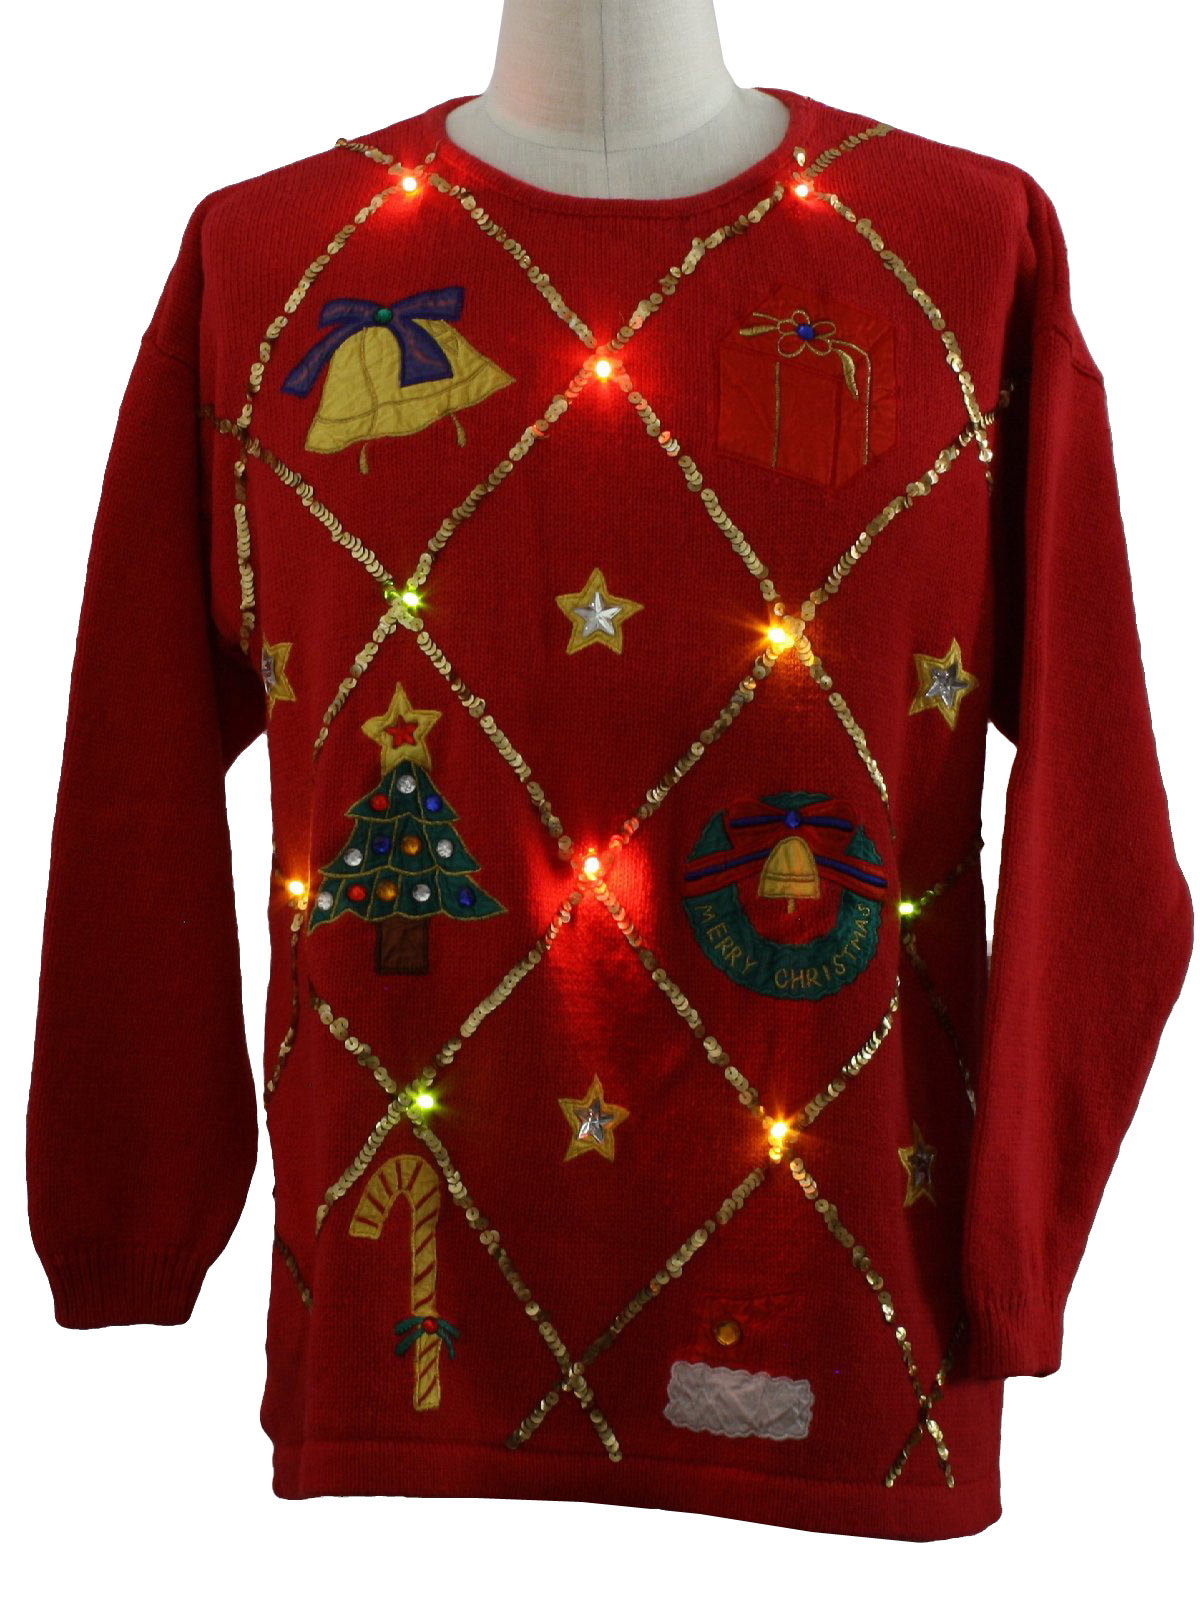 Lightup Ugly Christmas Sweater: -Work in Progress- Unisex red ...